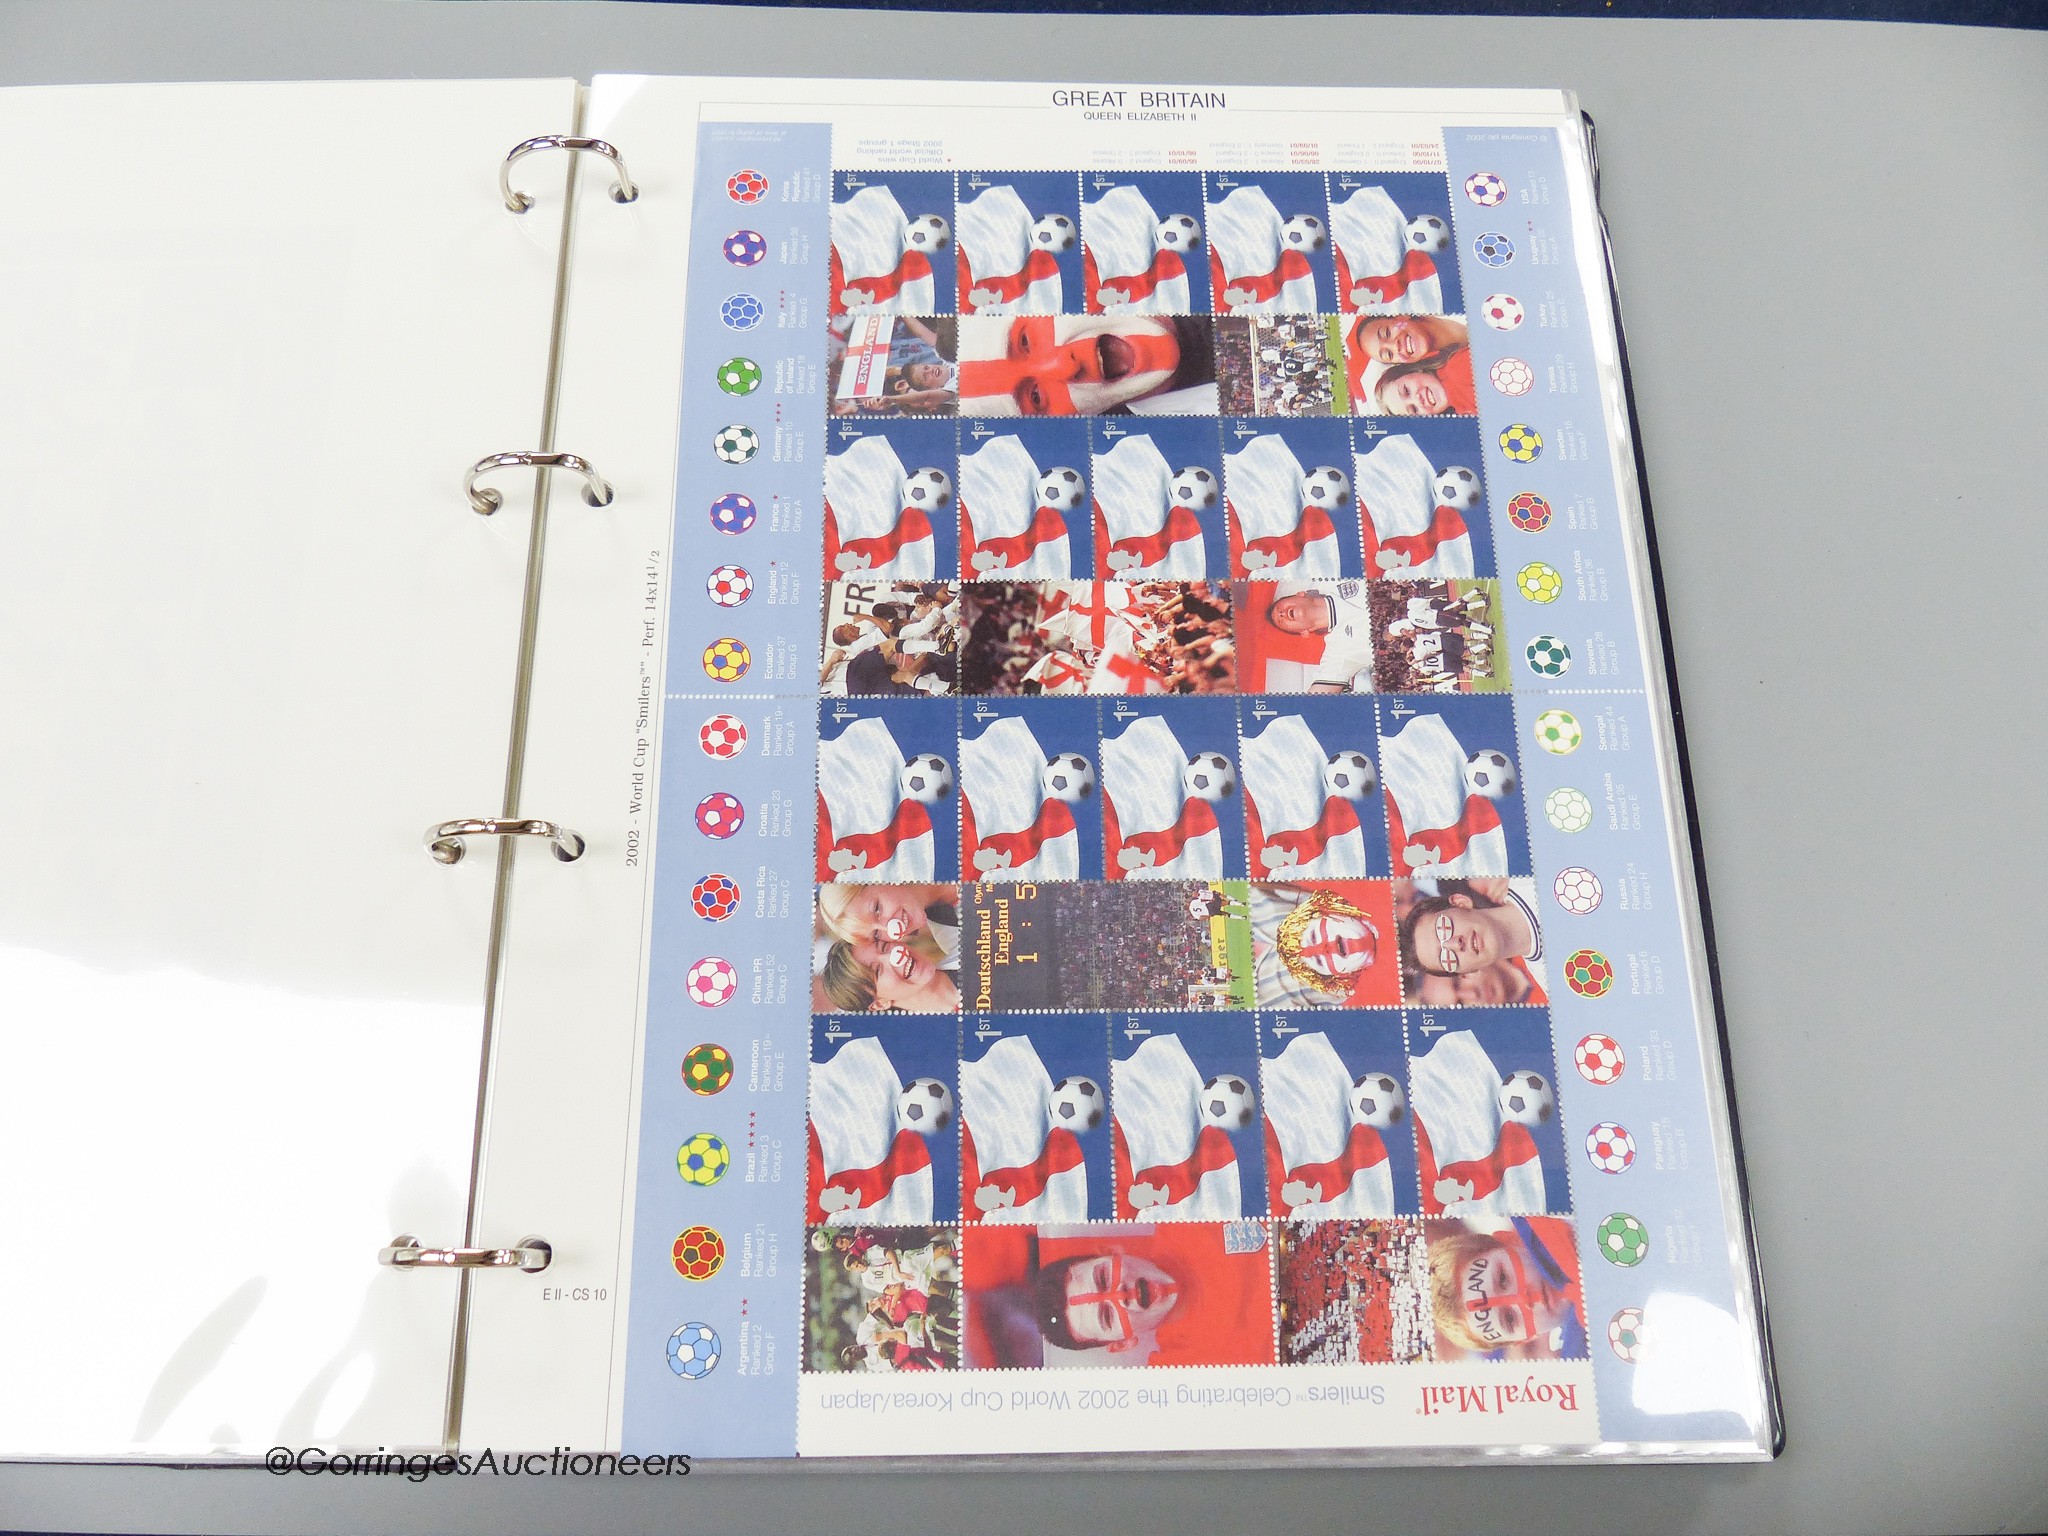 Great Britain stamps album, Smiler sheets from 2000–2005, one album